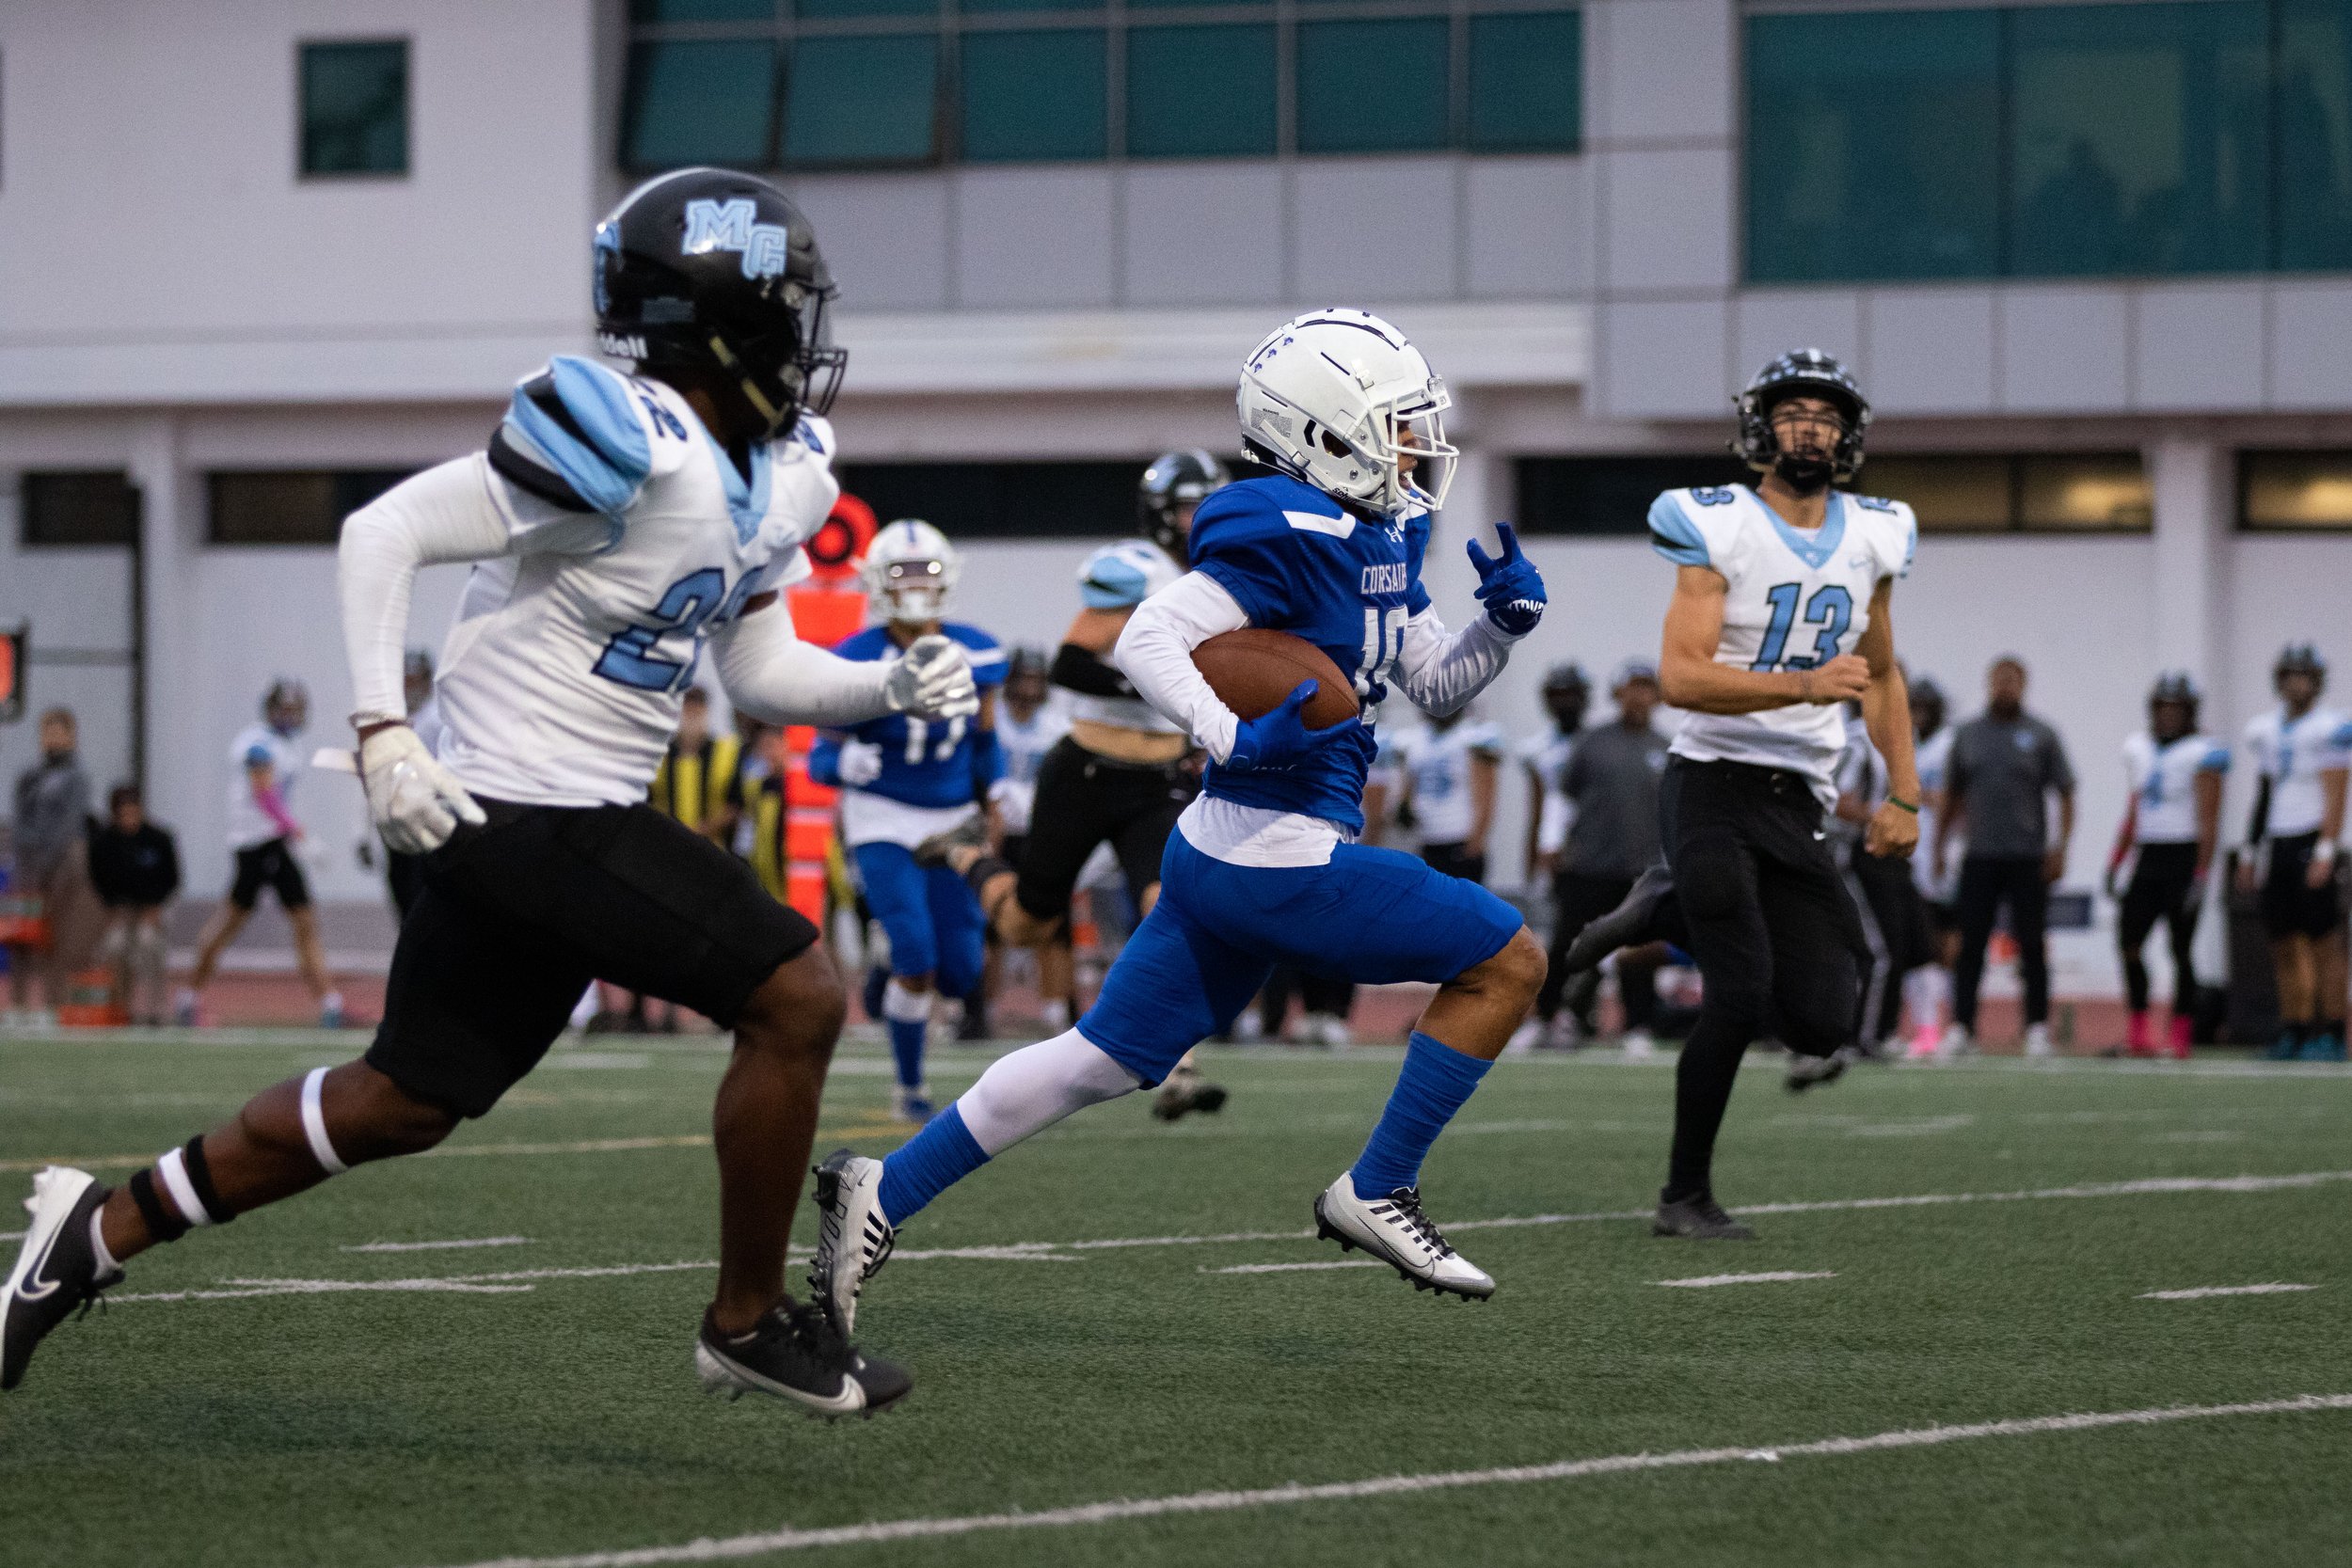  Santa Monica College Corsair wide receiver Darren Tenner-Taylor (19, middle) on his way to score the first touchdown in the recent home game against Moorpark College on Thursday, Oct. 13, 2022. Tenner-Taylor is being chased my Moorpark College Raide